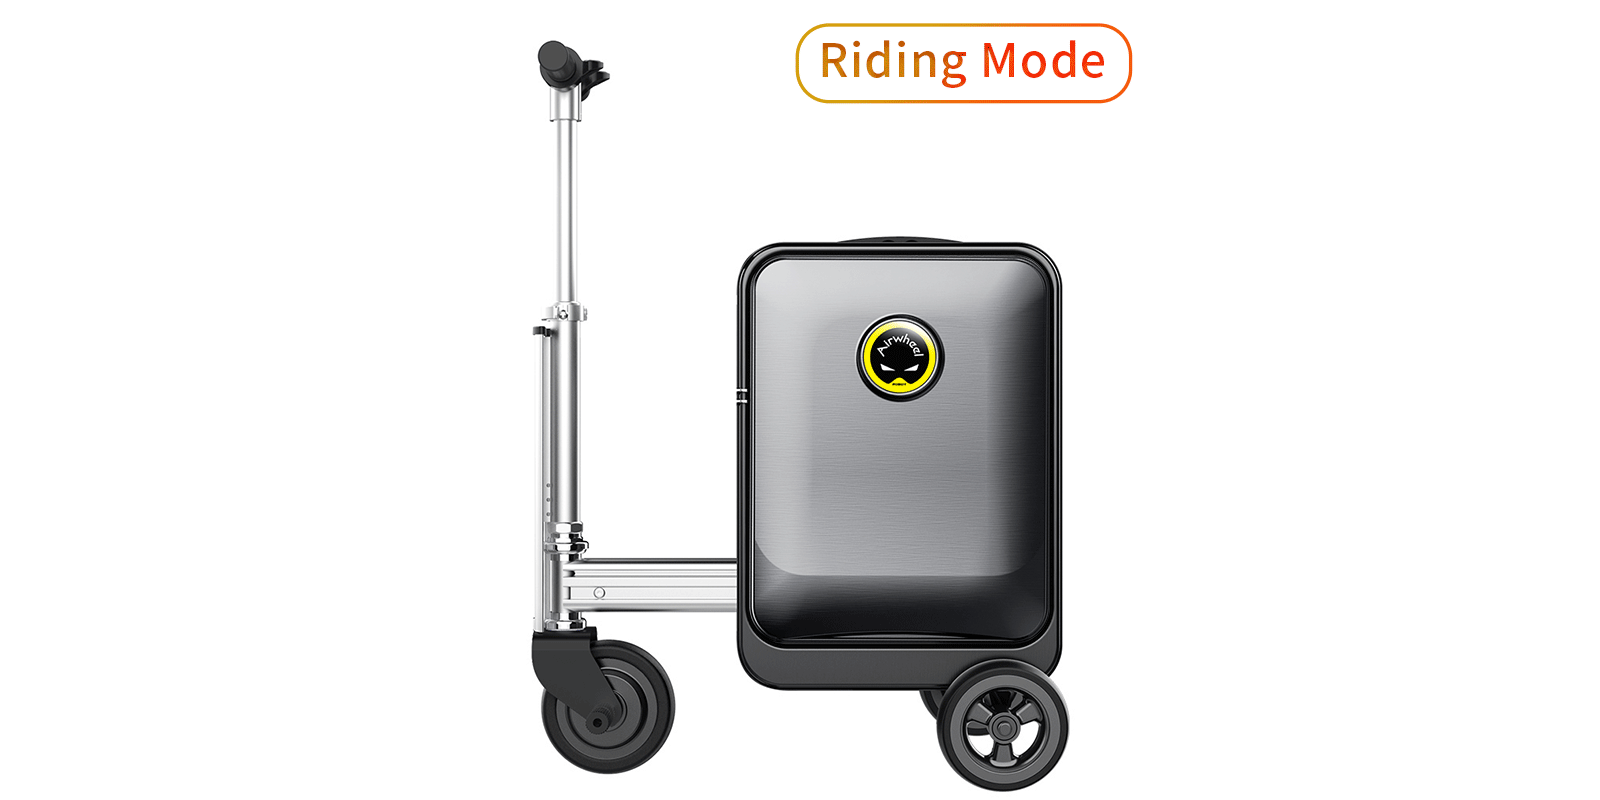 Airwheel-SE3S-Smart-Suitcase-Riding-and-Trolley-Modes-Desktop